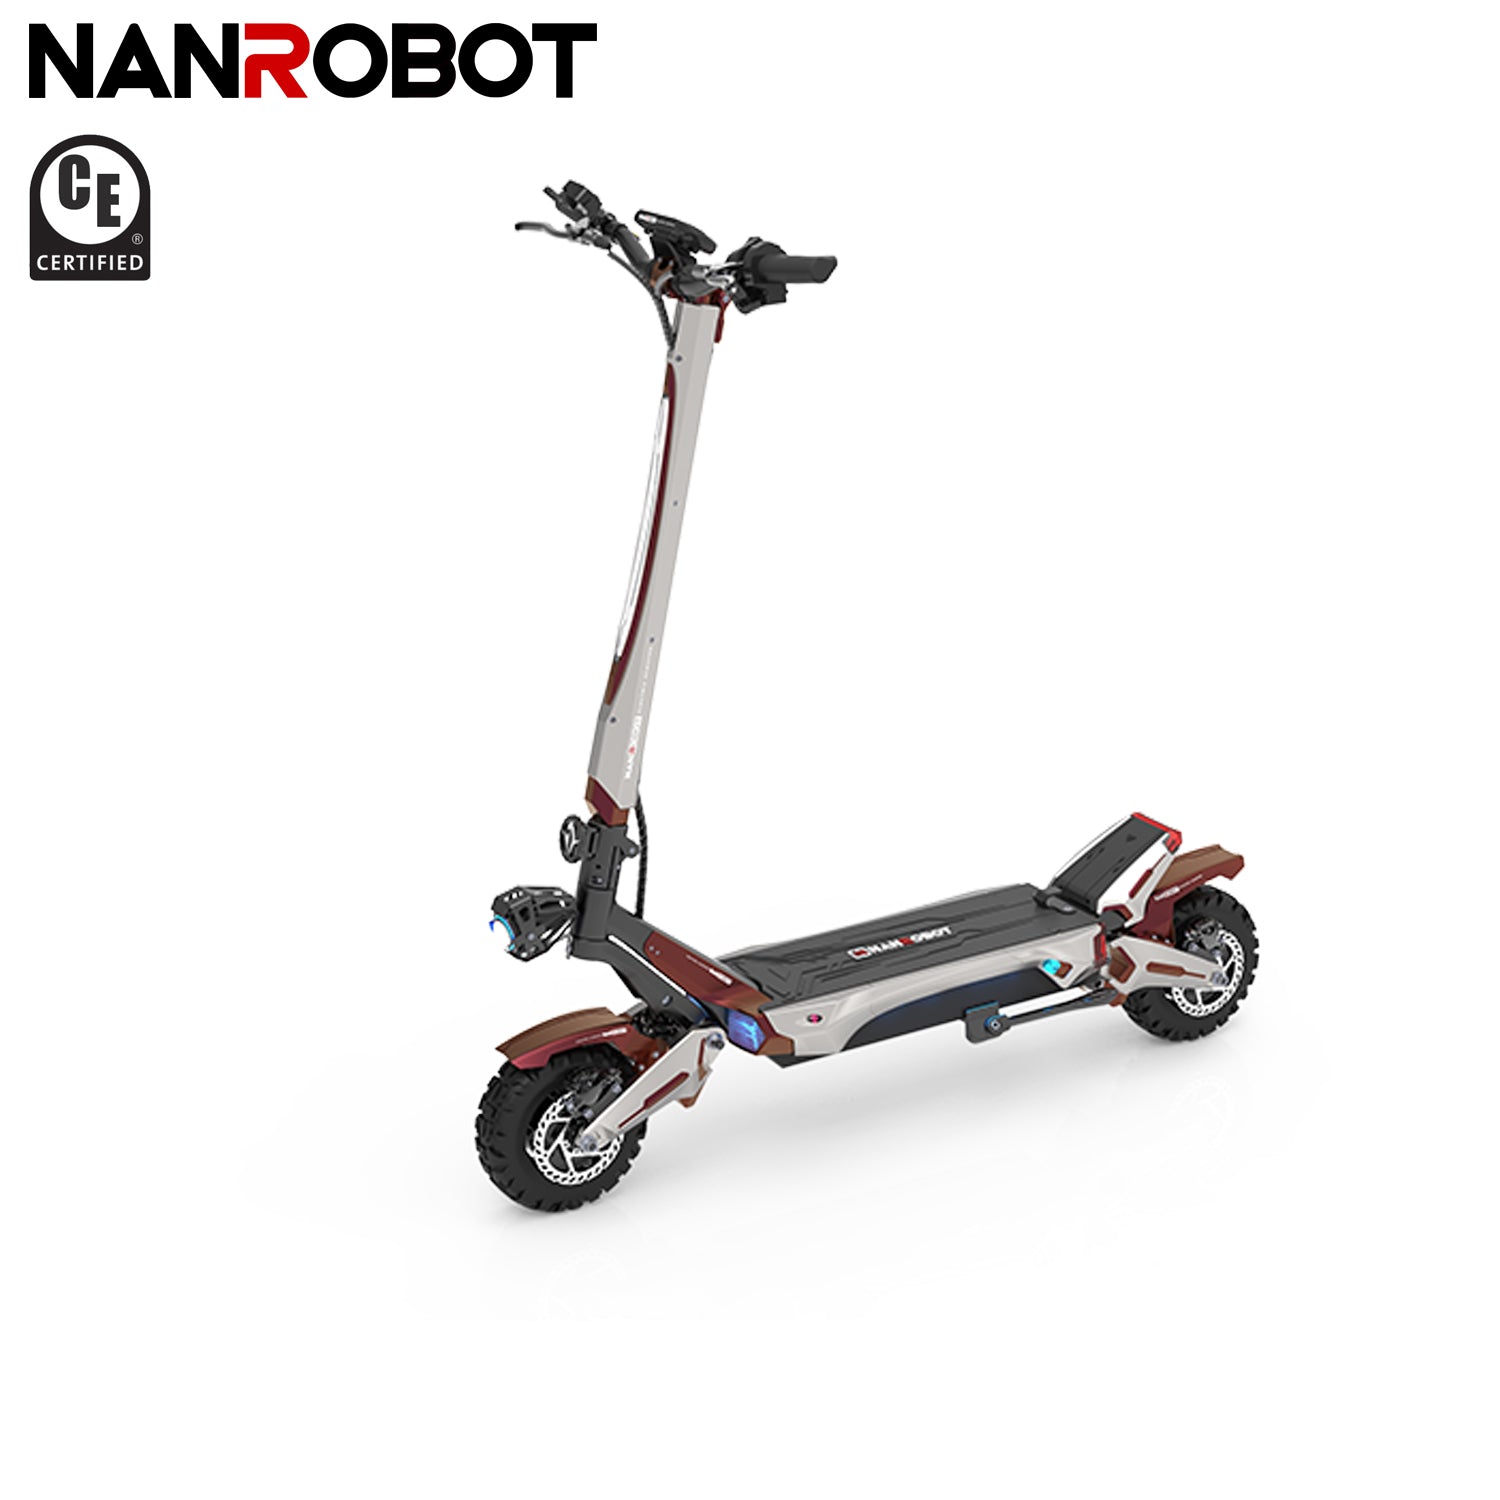 N6 NANROBOT E-Scooter with Dual Motor 1000Wx2,Range 30-40 Miles, Max Speed 40MPH and 10 inch Off-Road Tires